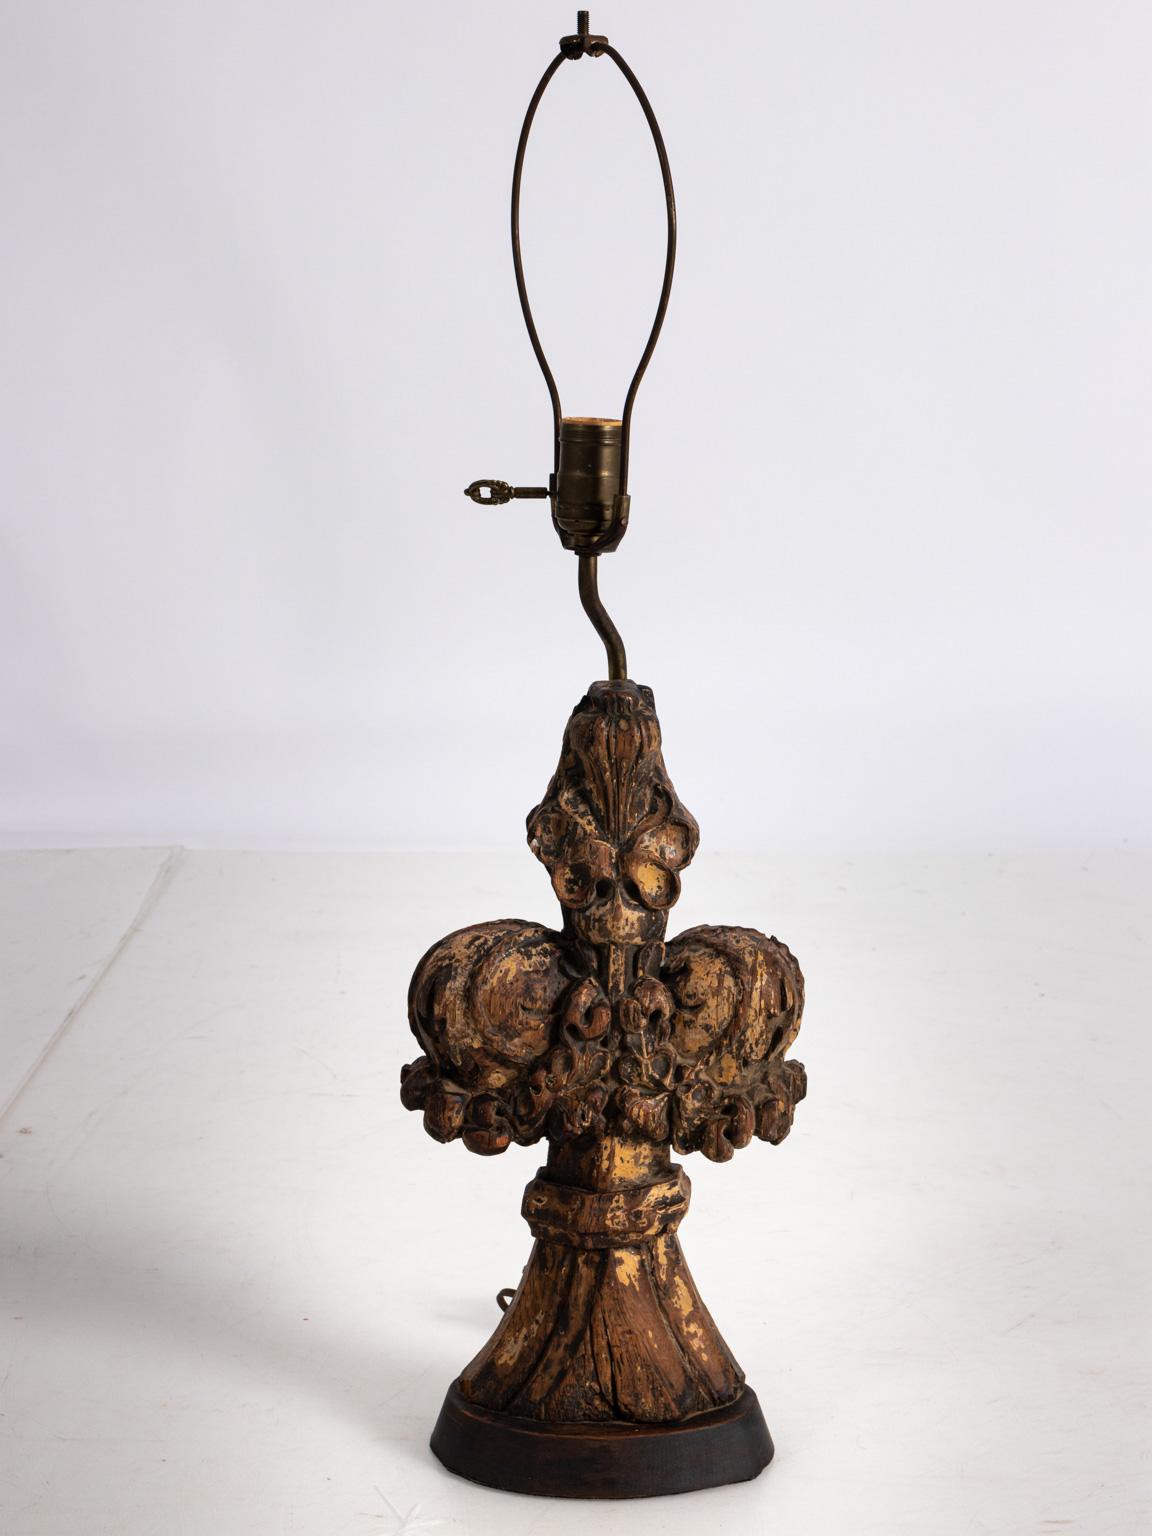 Carved architectural fragment repurposed as a lamp, circa 18th century. The piece also shows traces of paint possibly from a church. Please note of wear consistent with age including old patina along with cracks and traces of old gesso and paint.